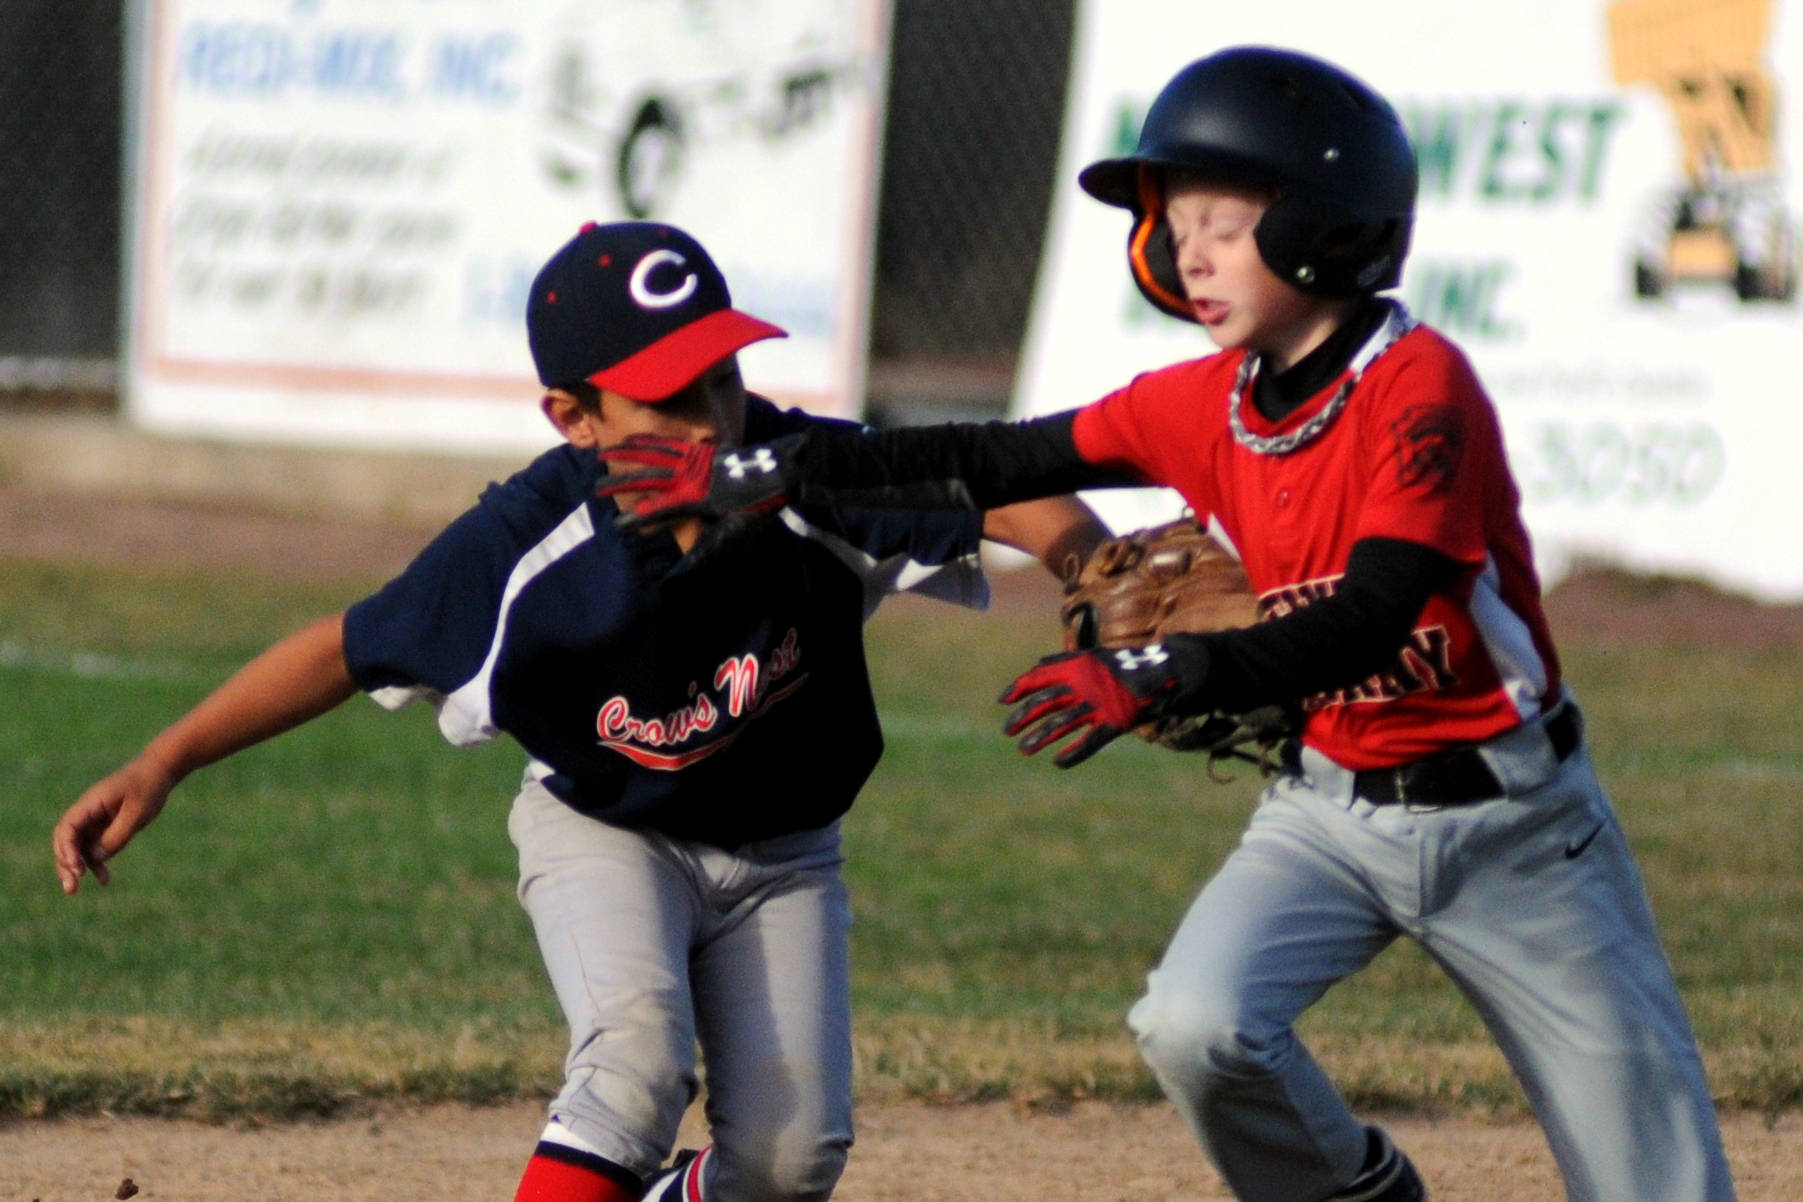 An otherwise normal Little League title game means more in pandemic